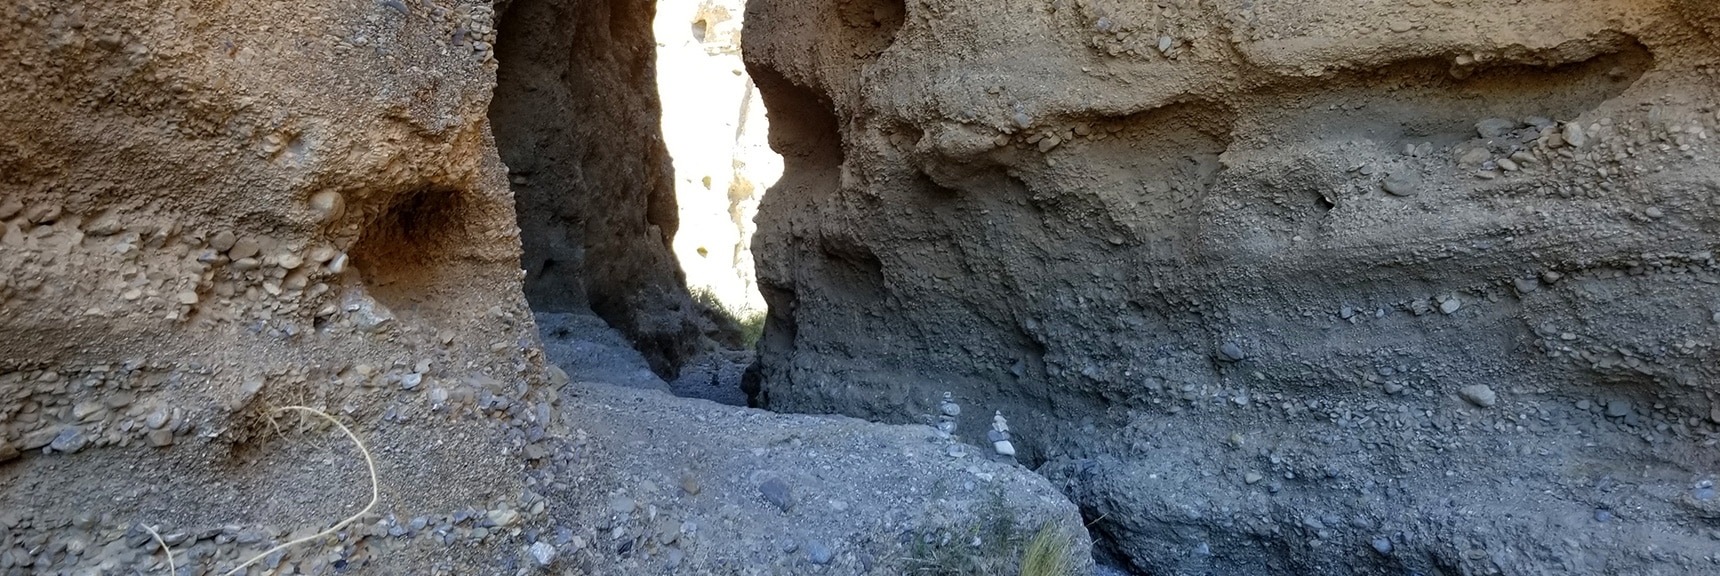 Looking Back Down the Upper Opening of the Slot Canyon | Harris Springs Canyon | Biking from Centennial Hills | Spring Mountains, Nevada